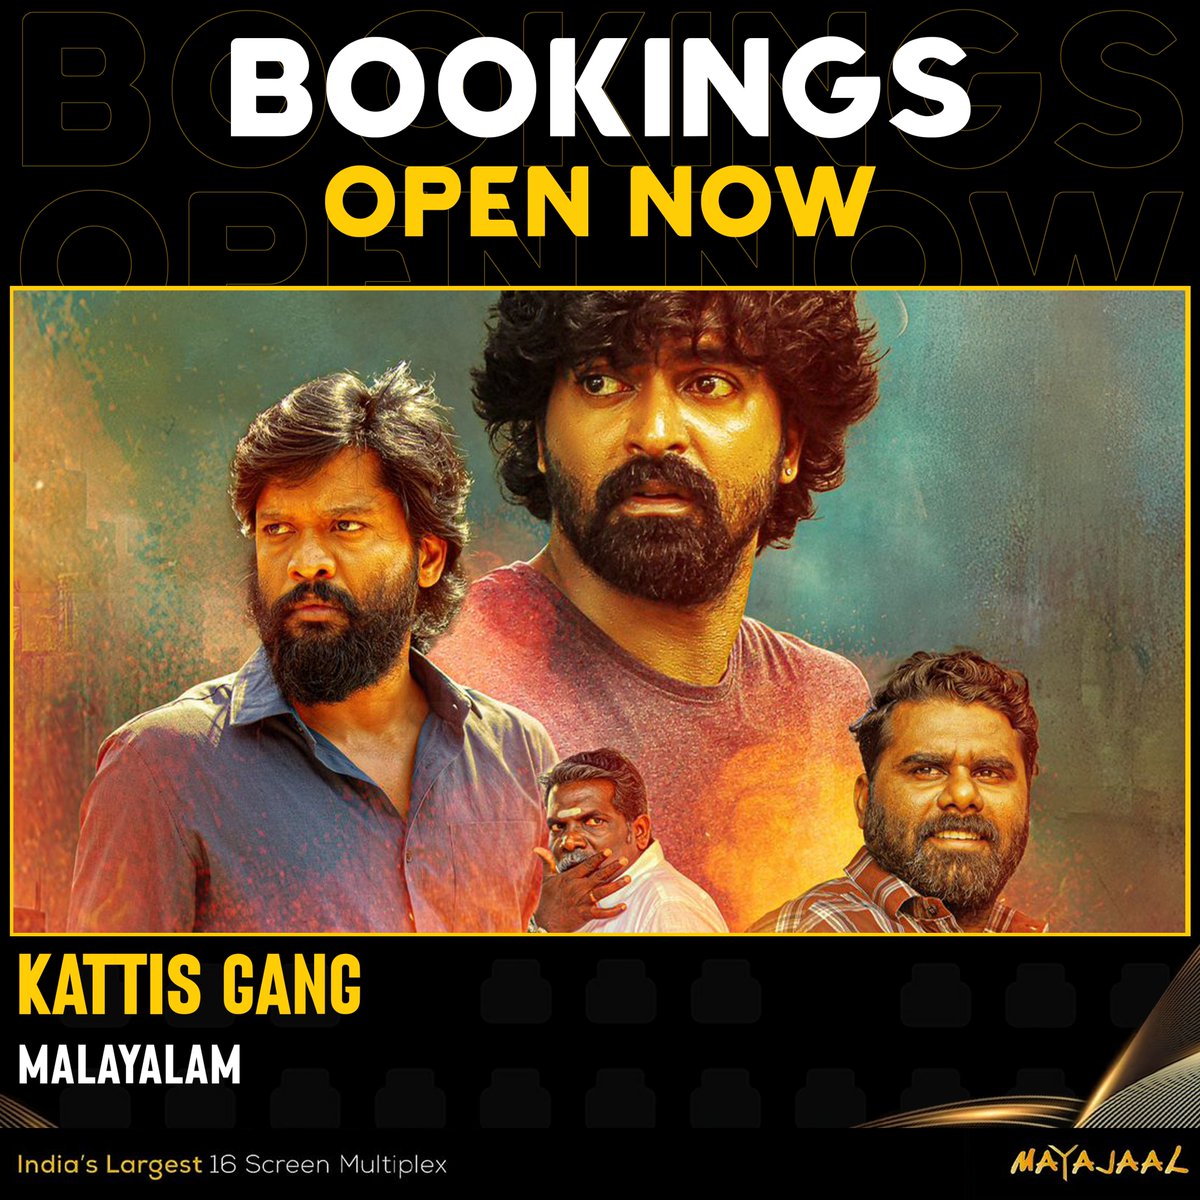 From Aanakatti to Chennai, Kattis gang is a thrilling ride filled with action and suspense! Bookings open for #KattisGang (Malayalam) at #Mayajaal 🎟️bit.ly/3sVdbqD #Unnilalu #Soundarraja #AneelDev